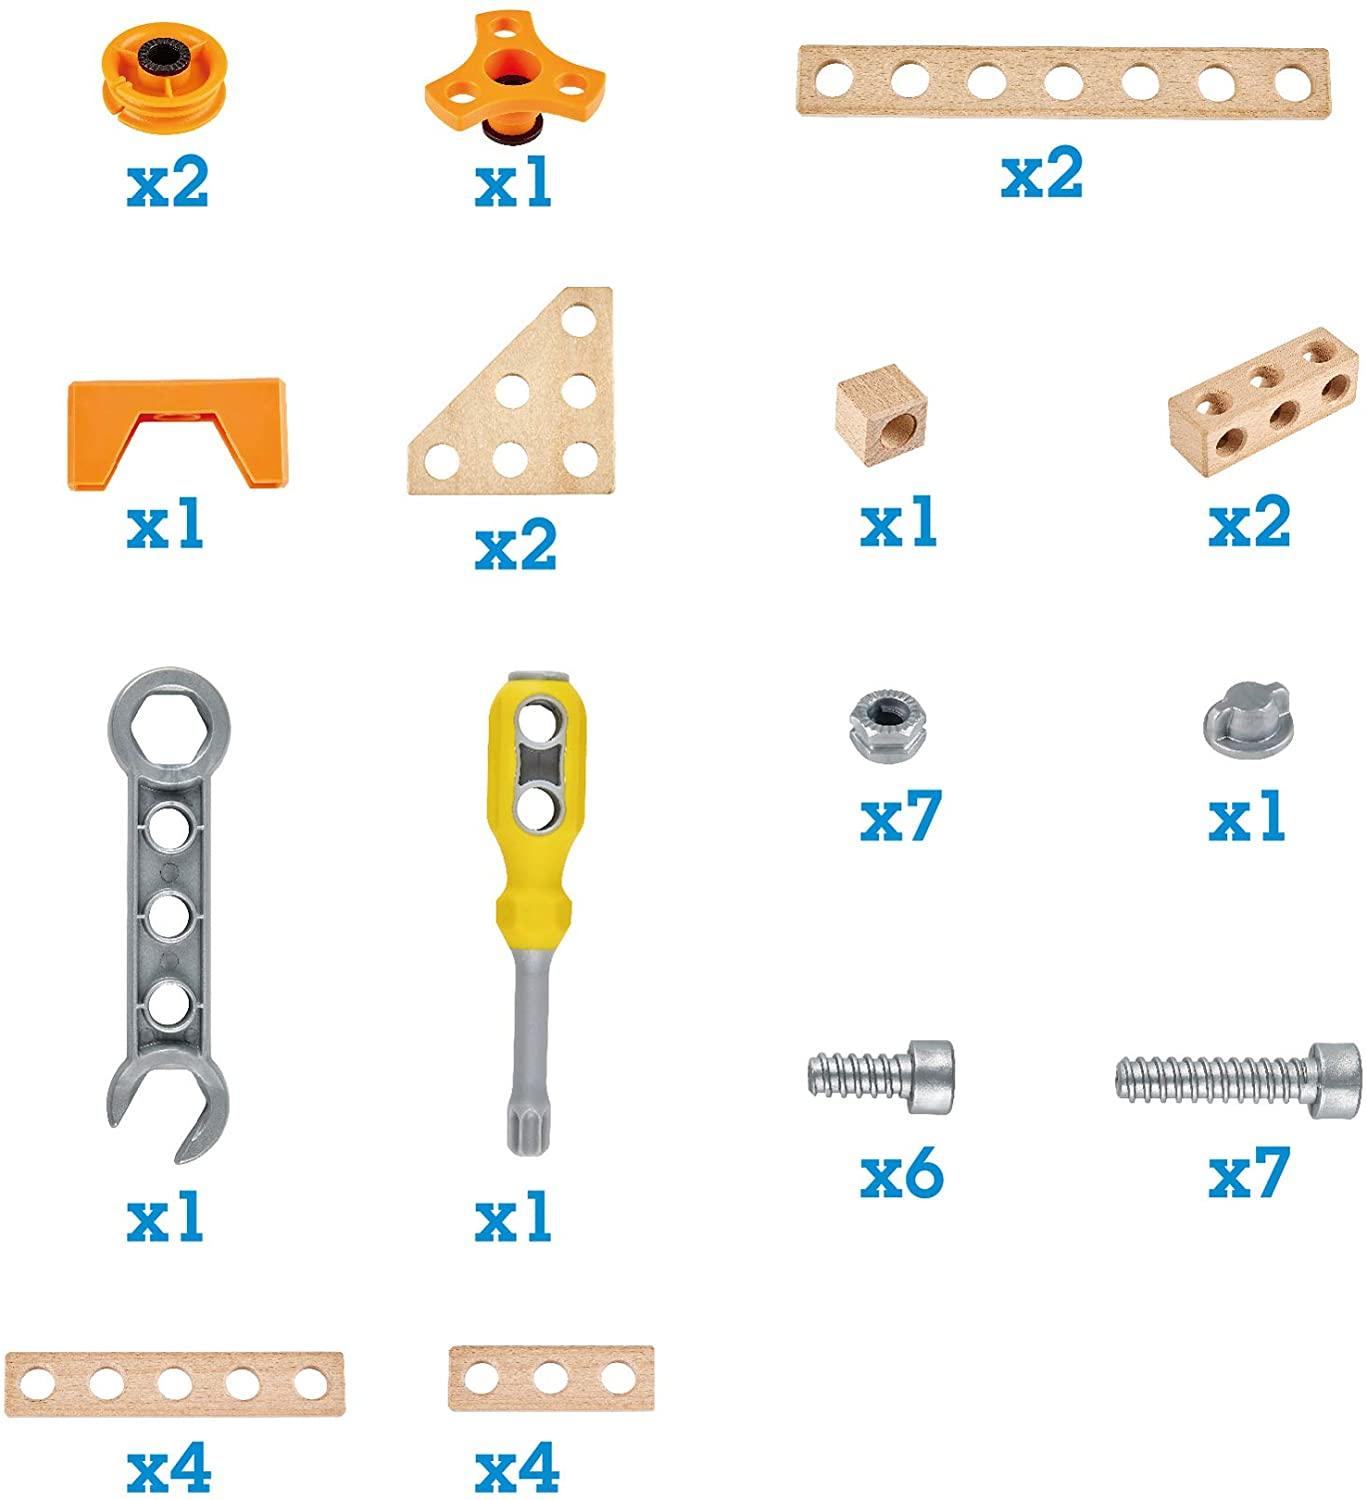 Detailing the different pieces and numbers of a child's inventor kit,